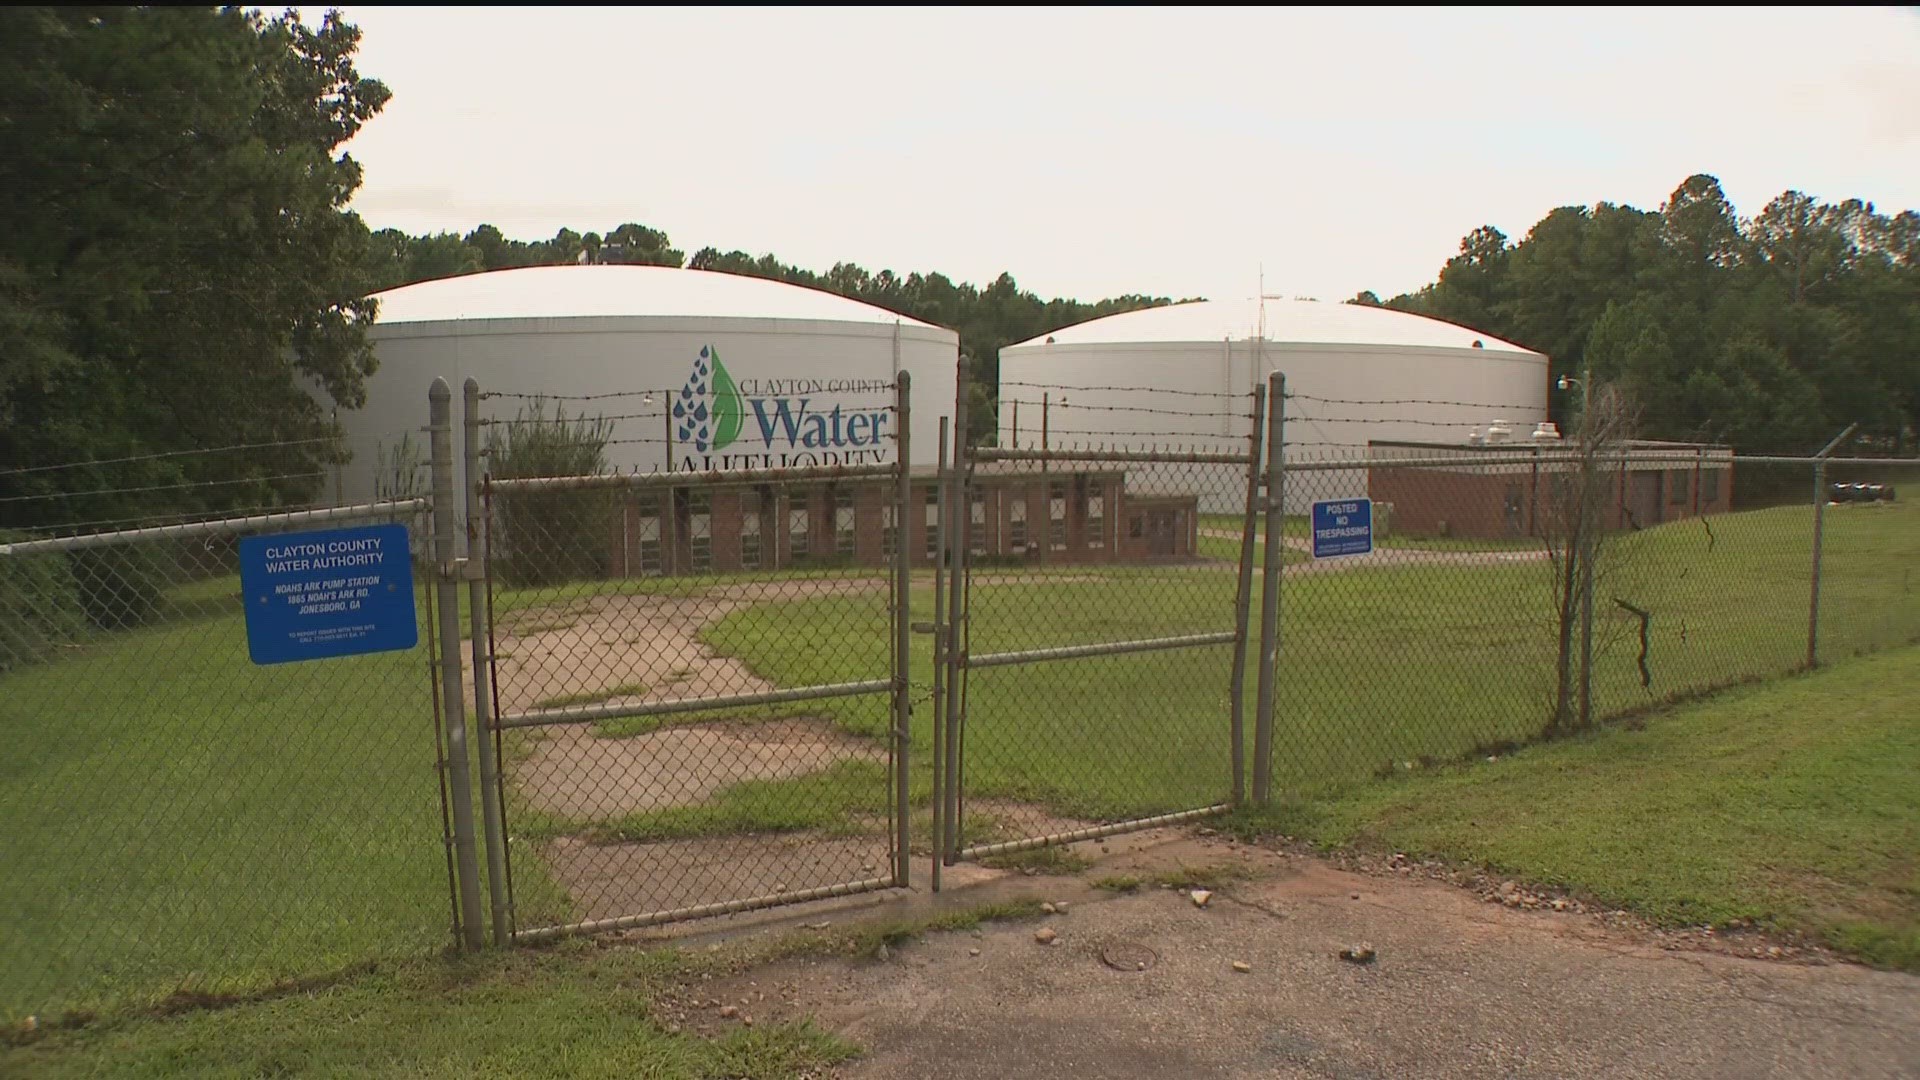 Clayton County: More than $450 million is needed to upgrade water system.